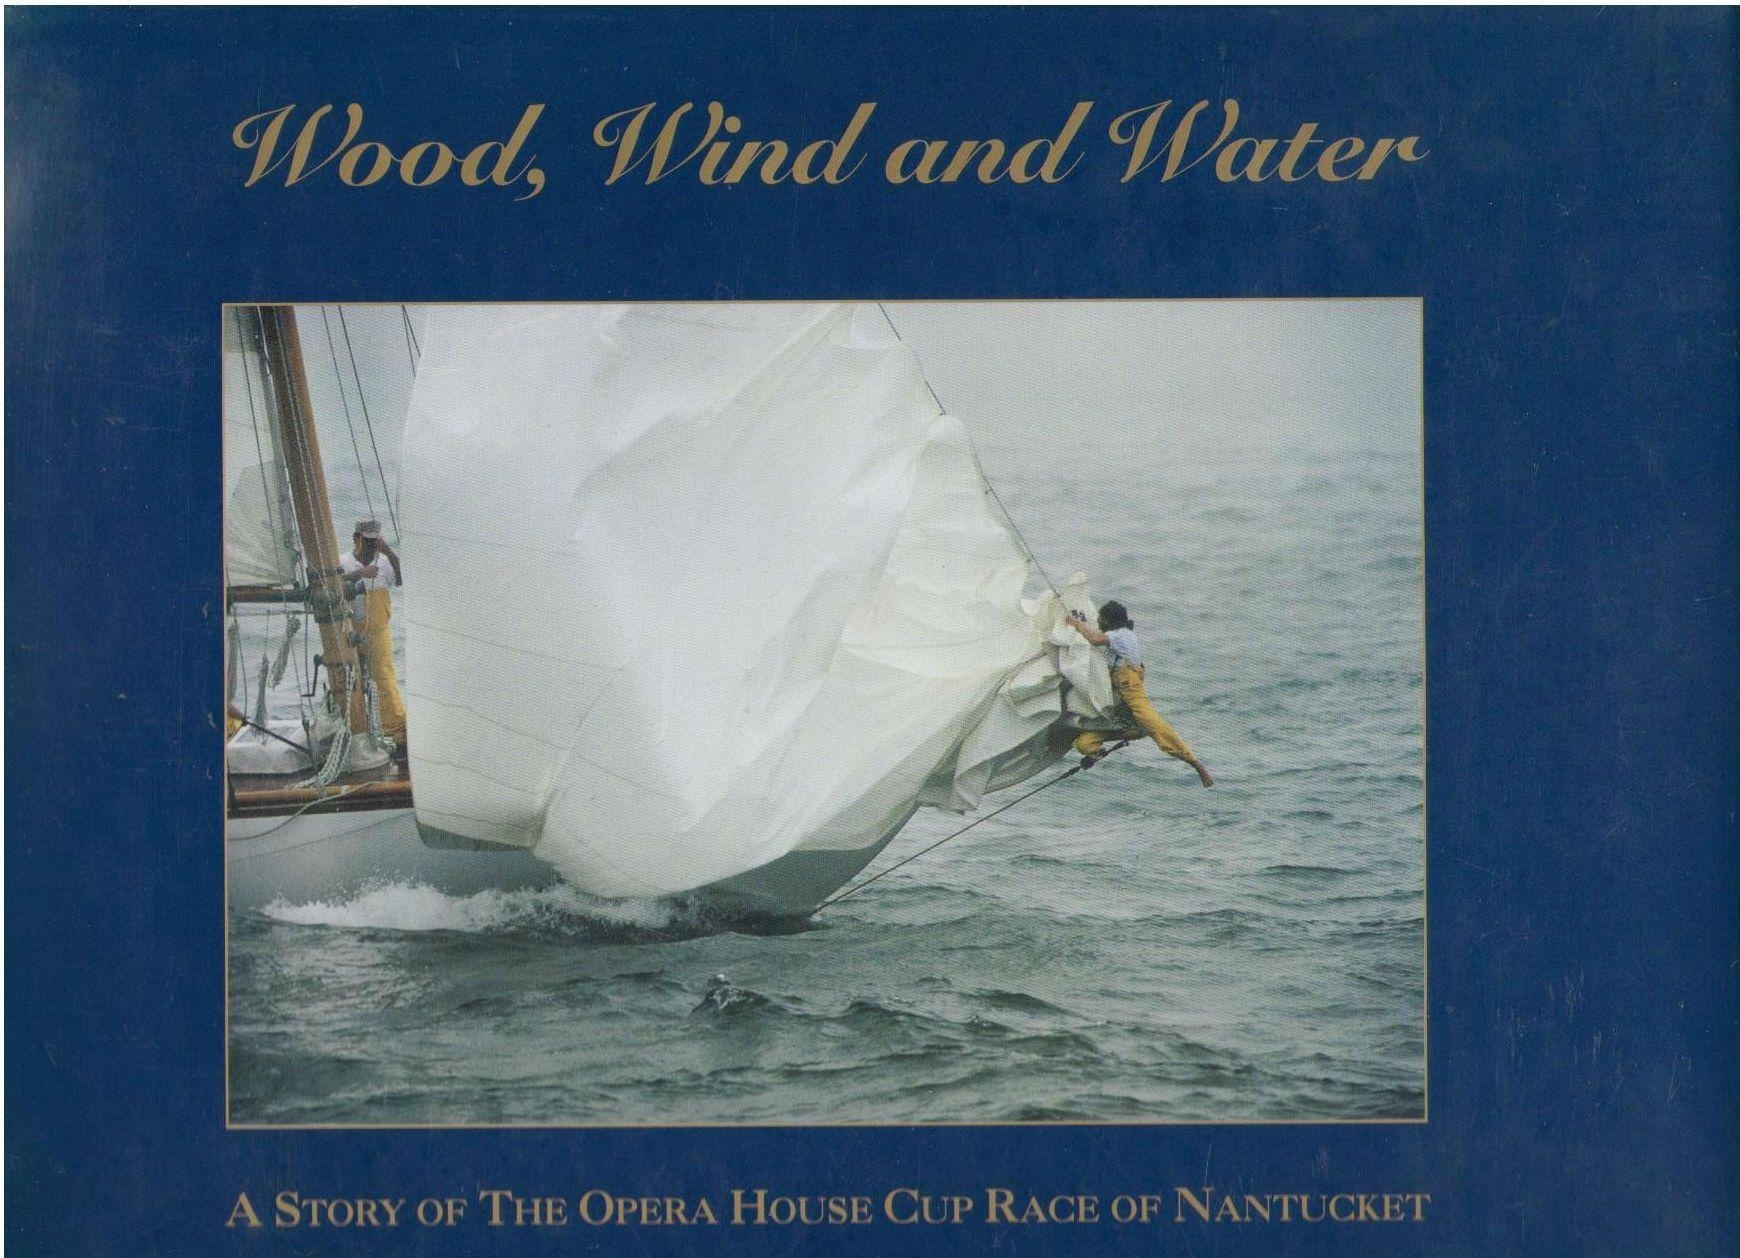 Wood, Wind and Water